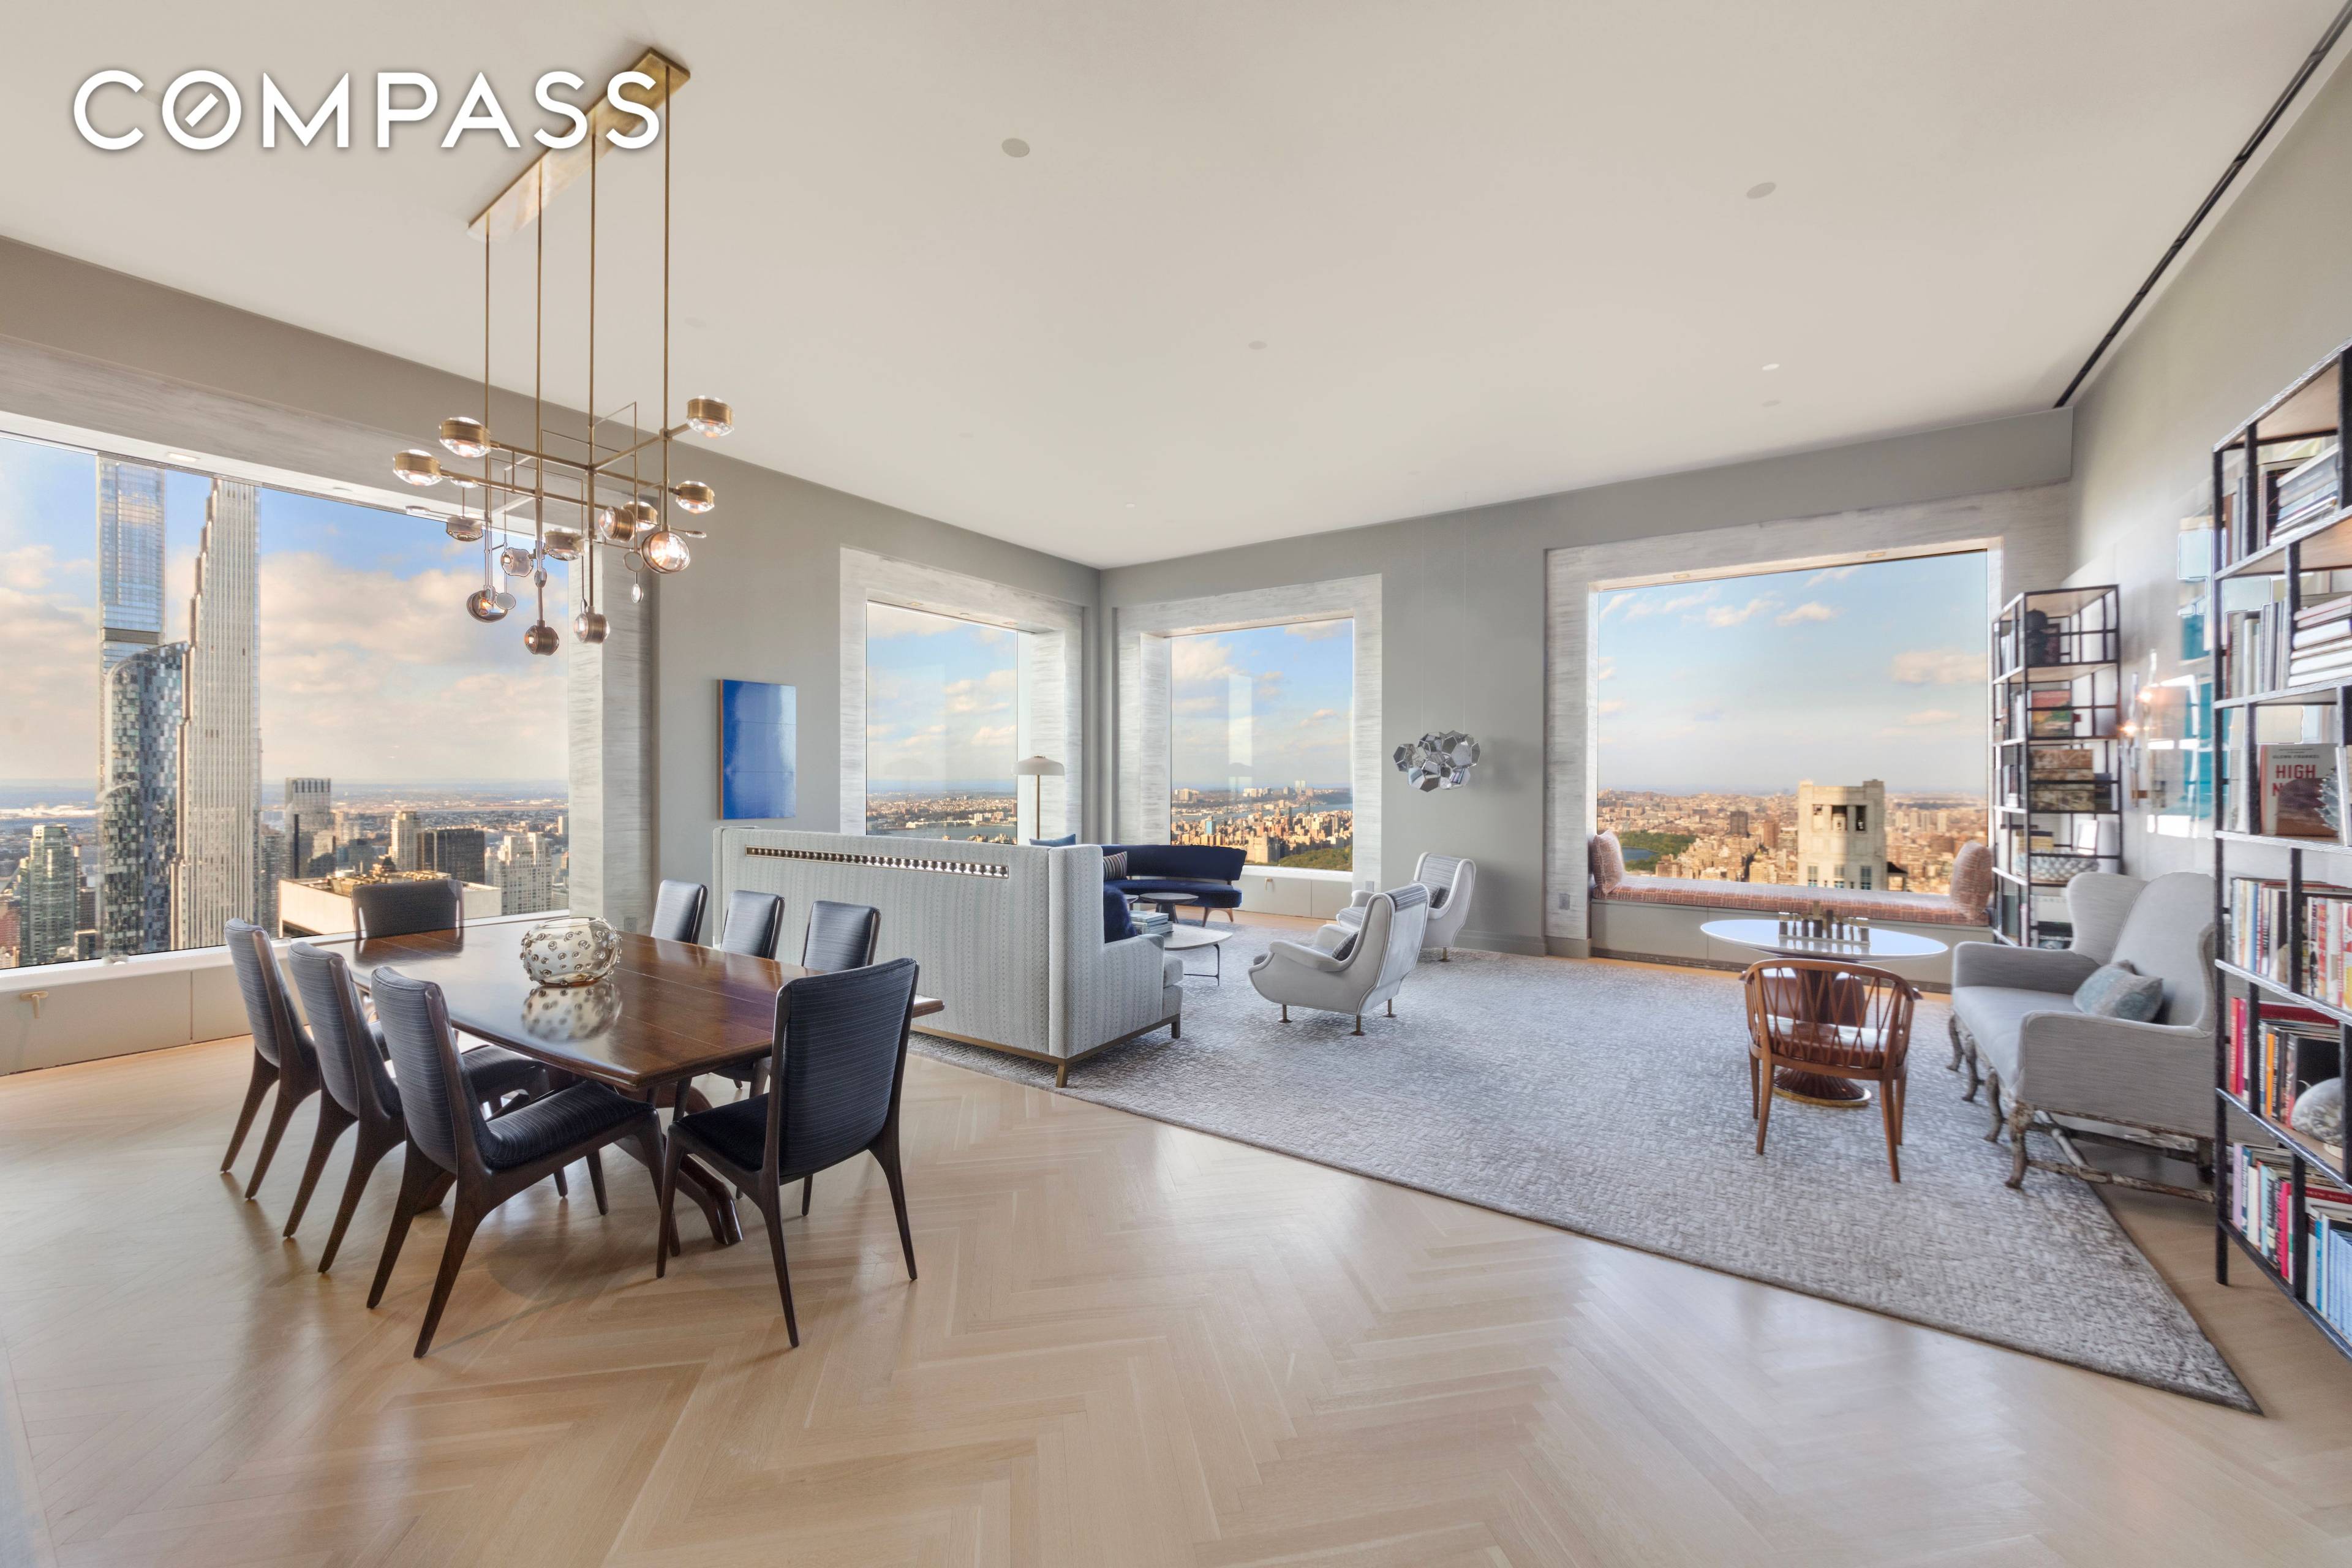 Towering 96 stories at a prized Park Avenue address between 56th and 57th Streets, sits an incredibly striking, unparalleled luxury condominium in one of the tallest residential buildings in the ...